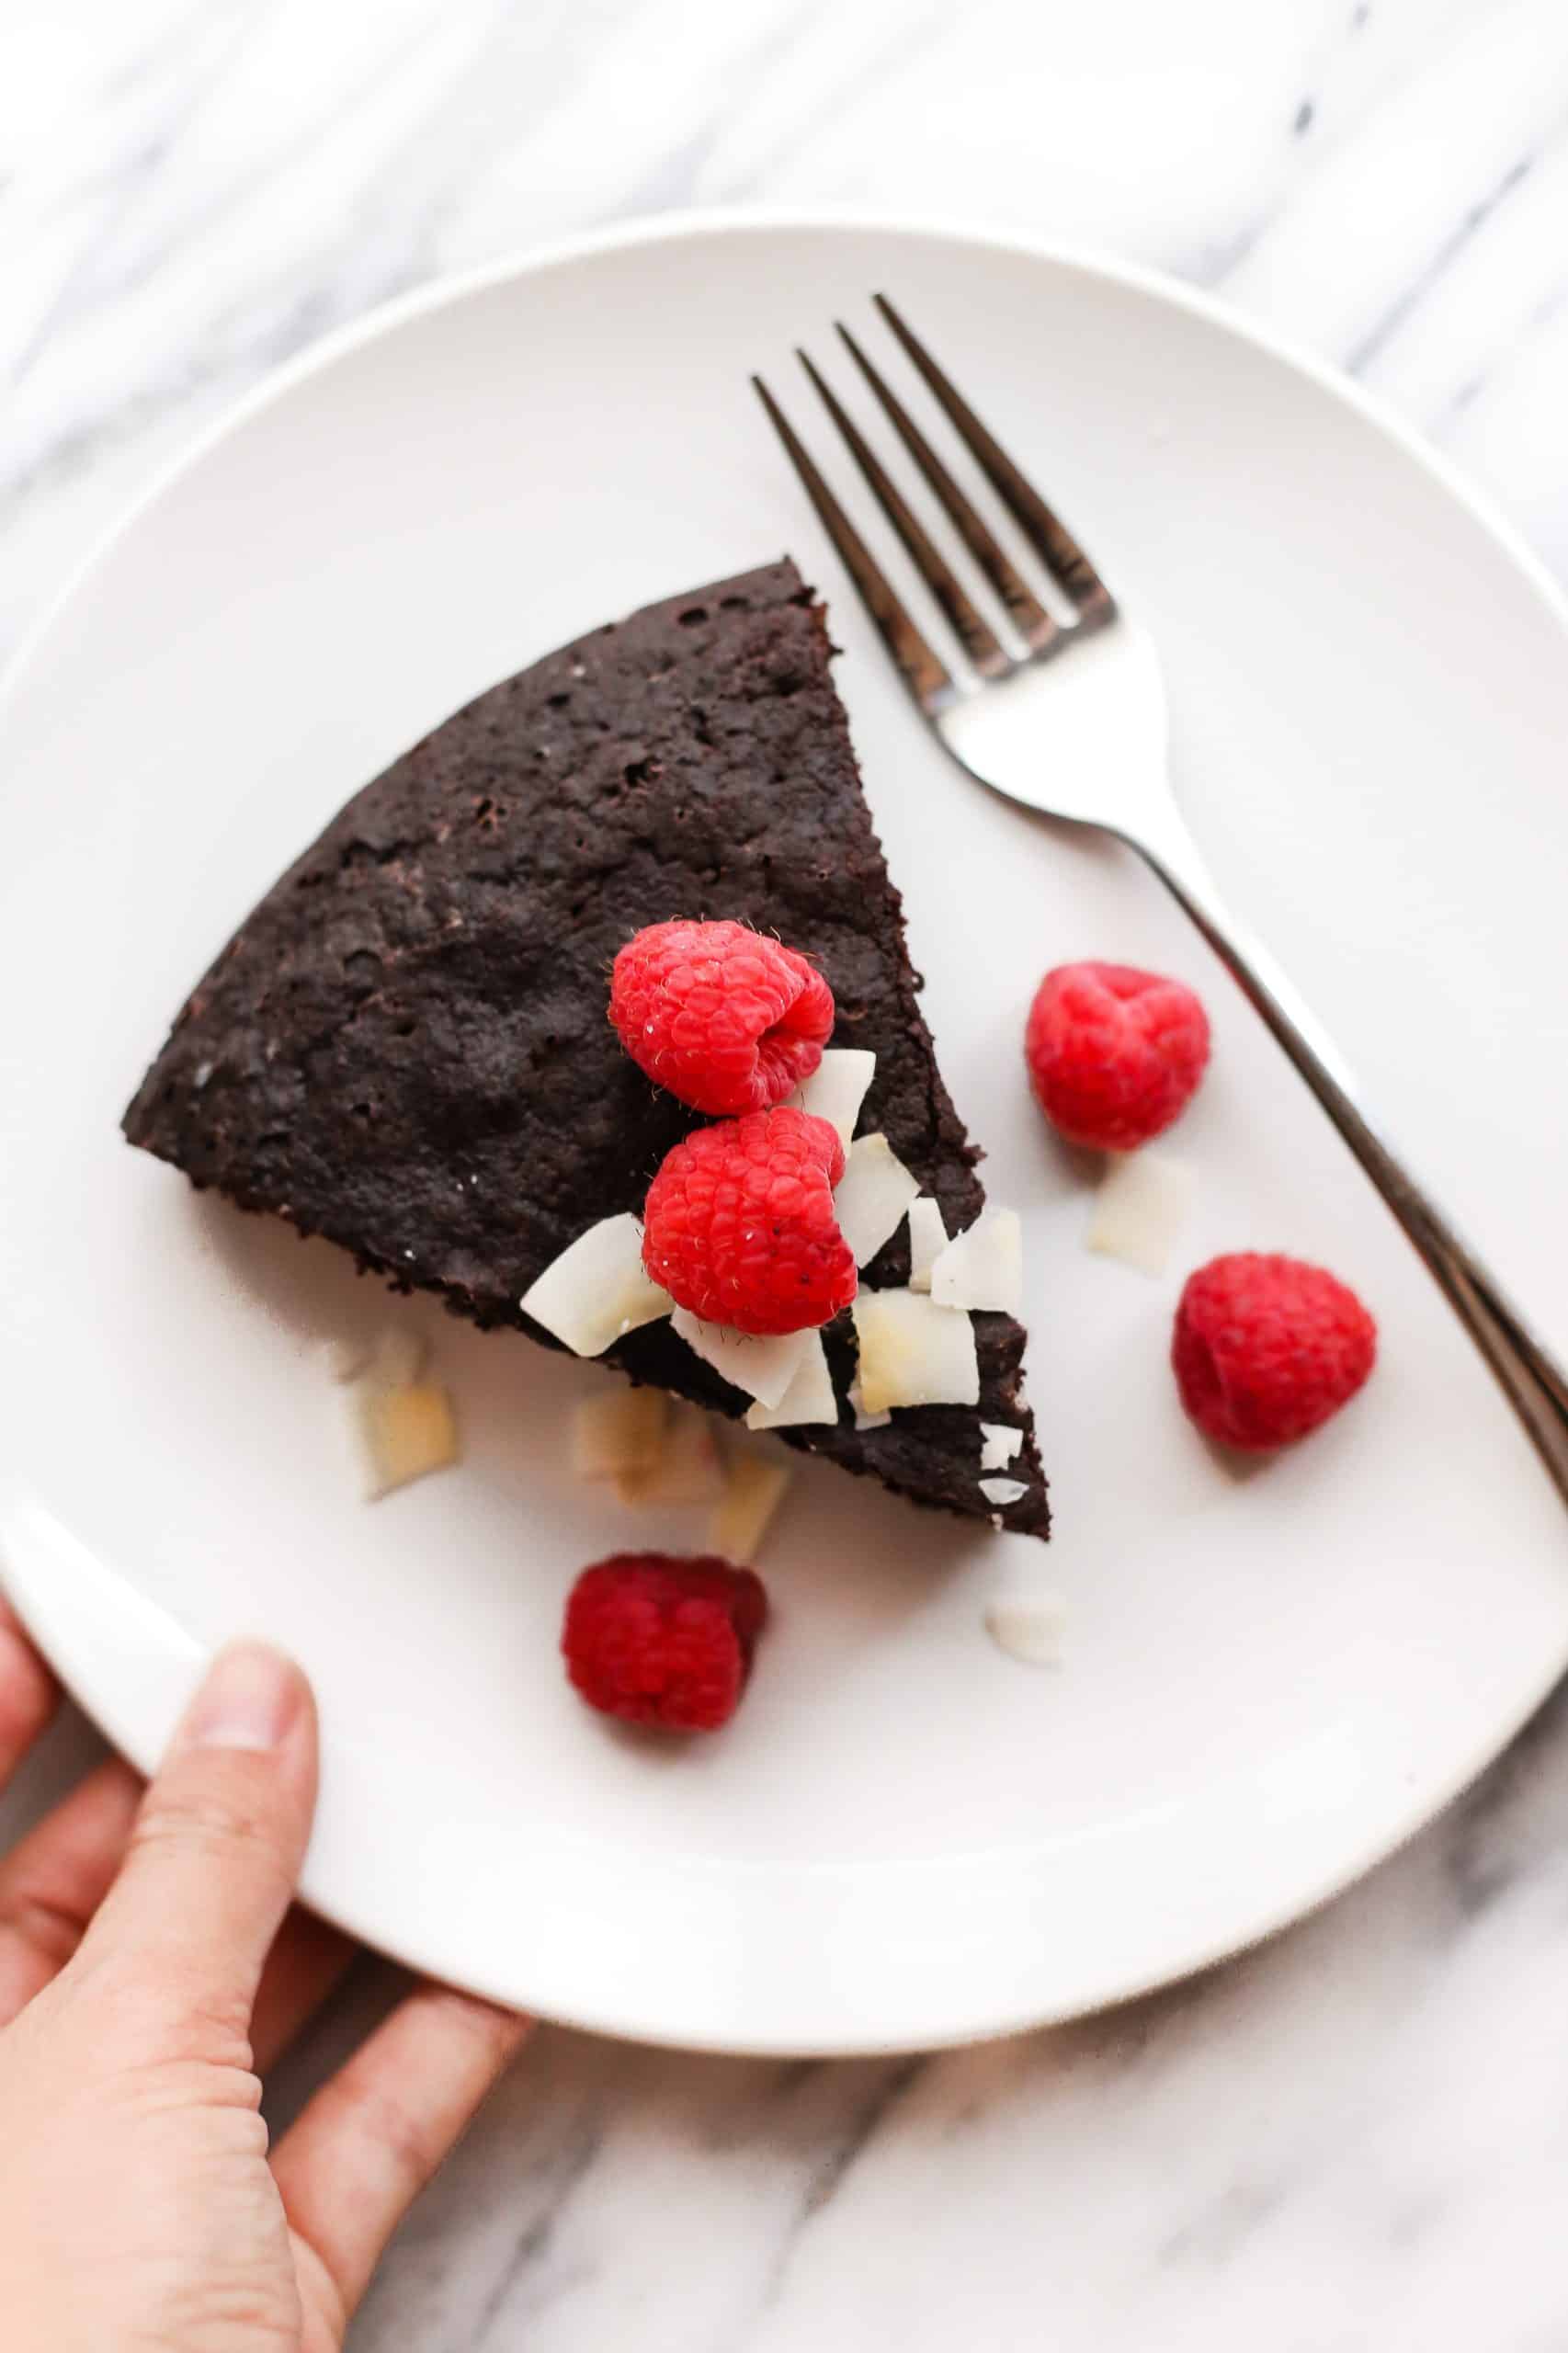 Hand holding a plate with a slice of gluten-free chocolate cake.